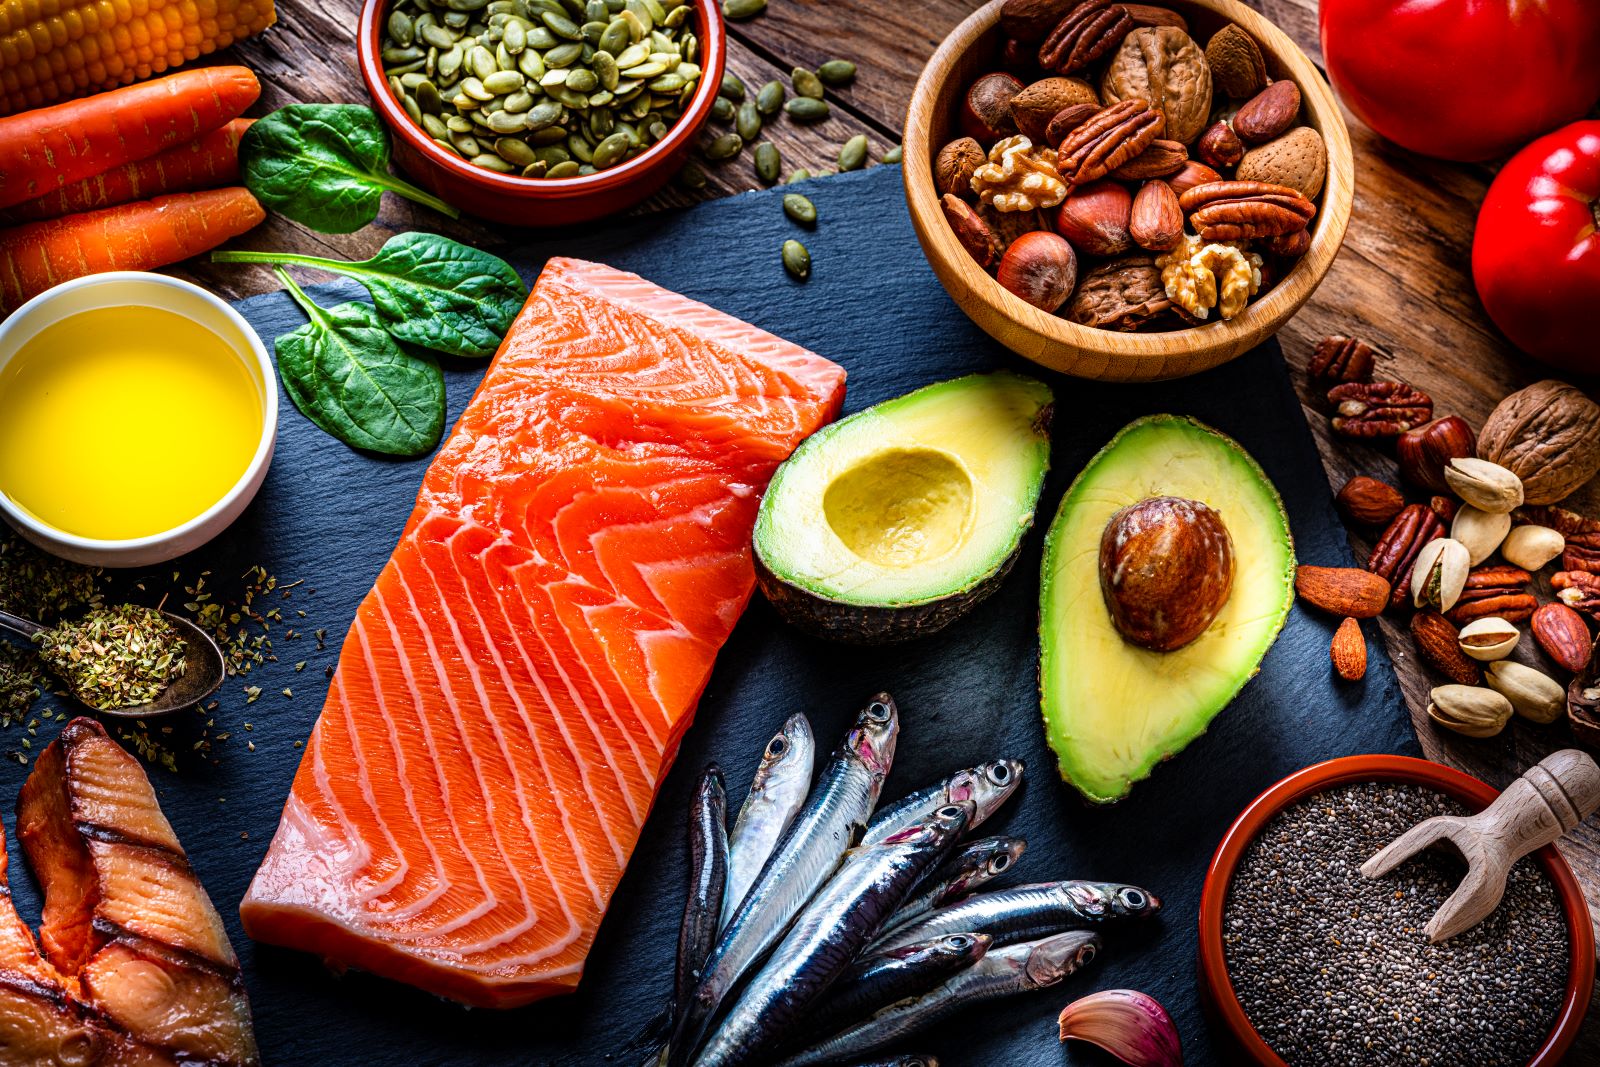 The Mediterranean diet was named the healthiest diet for the sixth straight year. Learn what it is, and how to incorporate it in your meals.